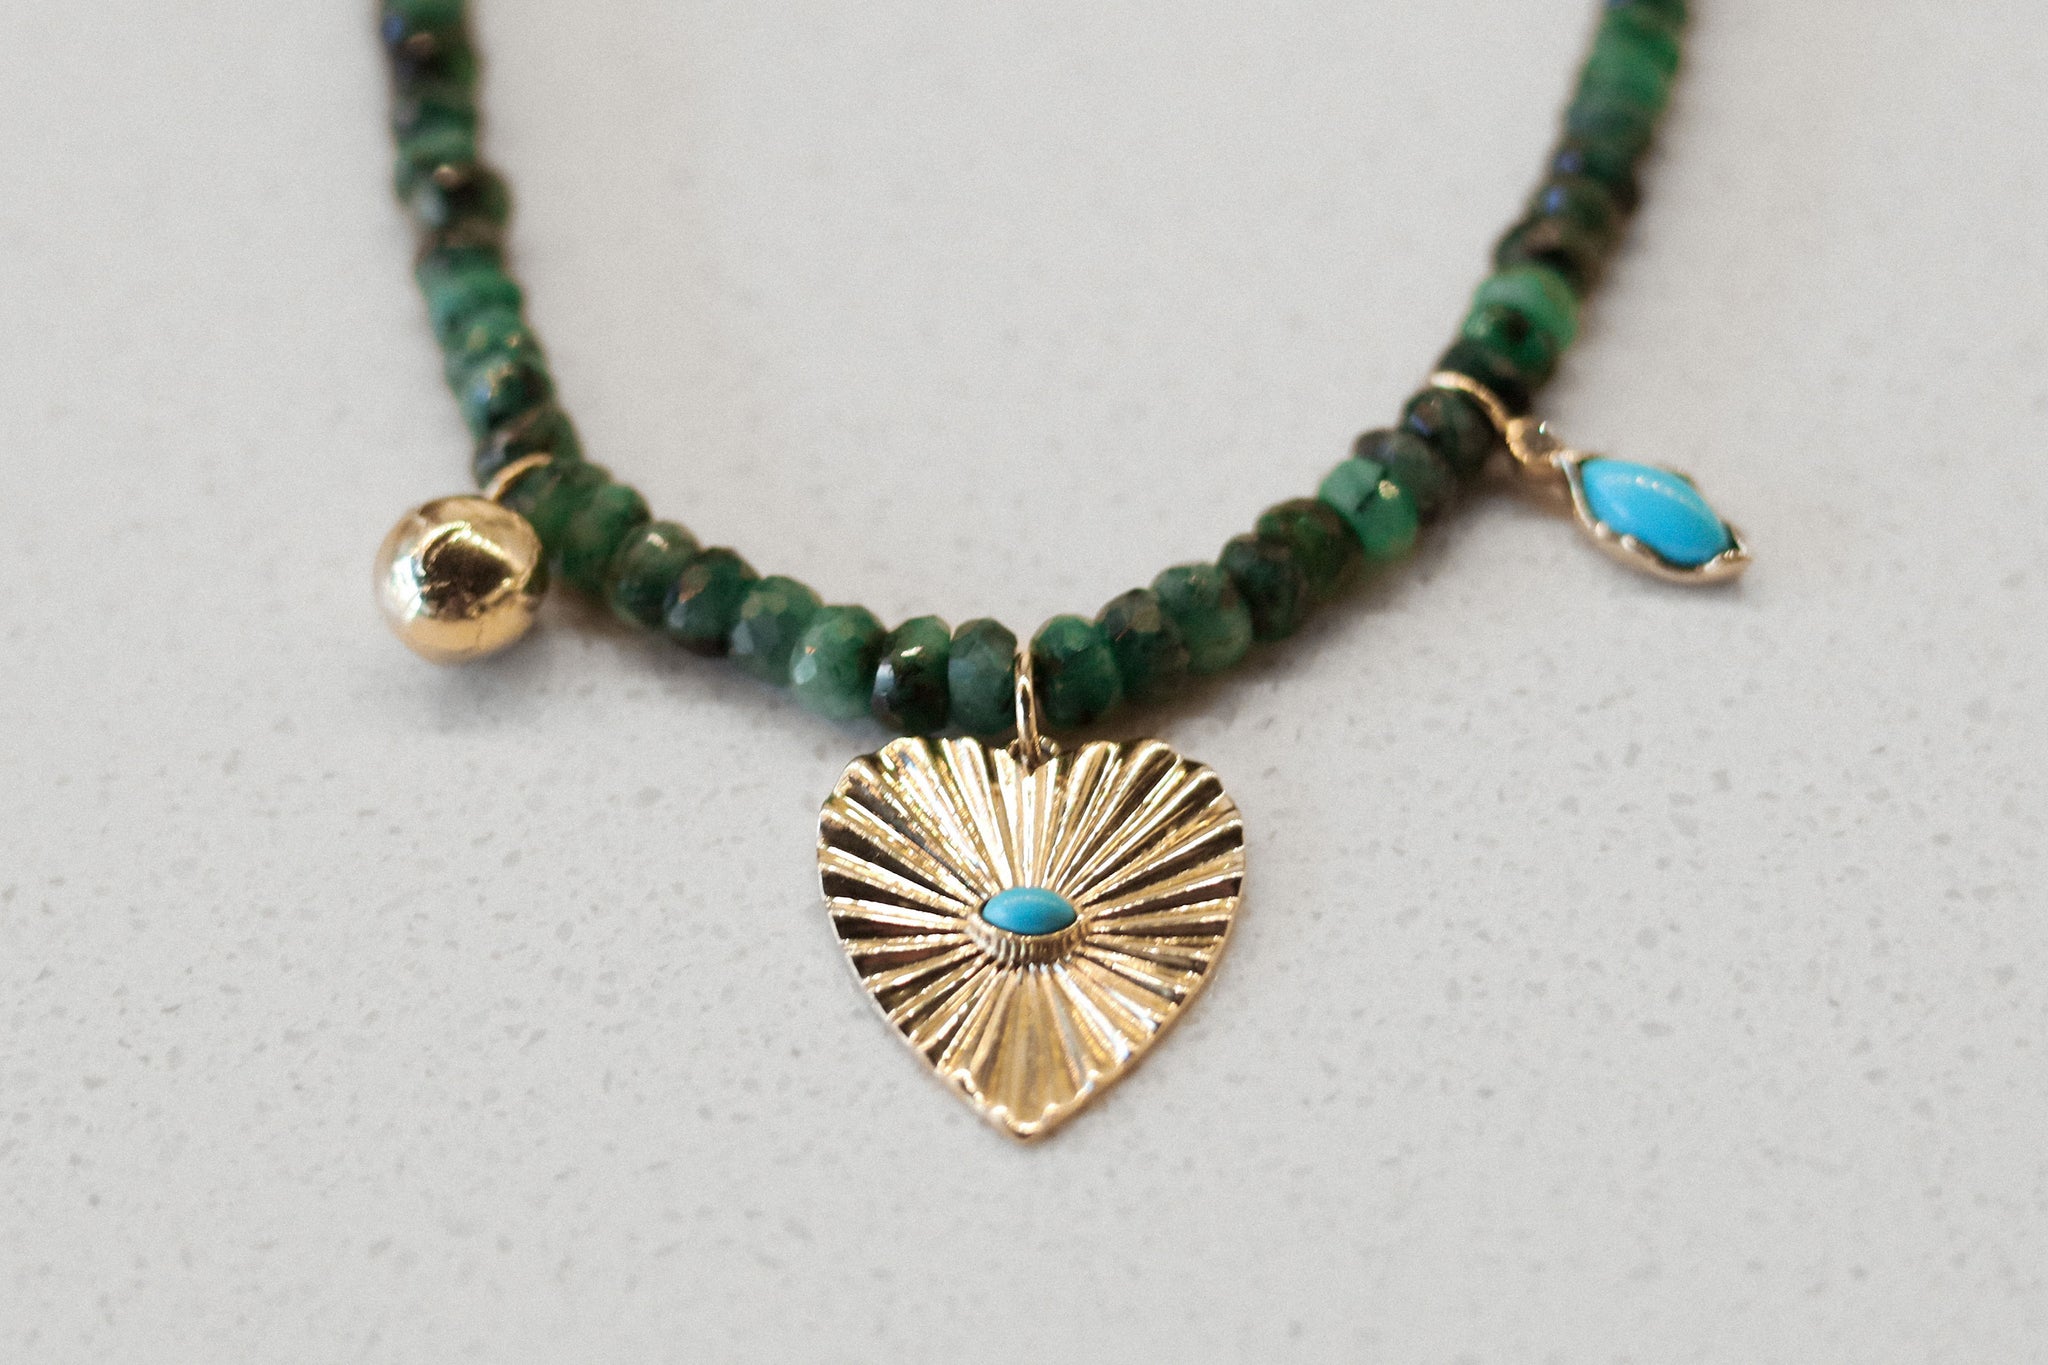 OAK Raw Emerald with Charms Necklace